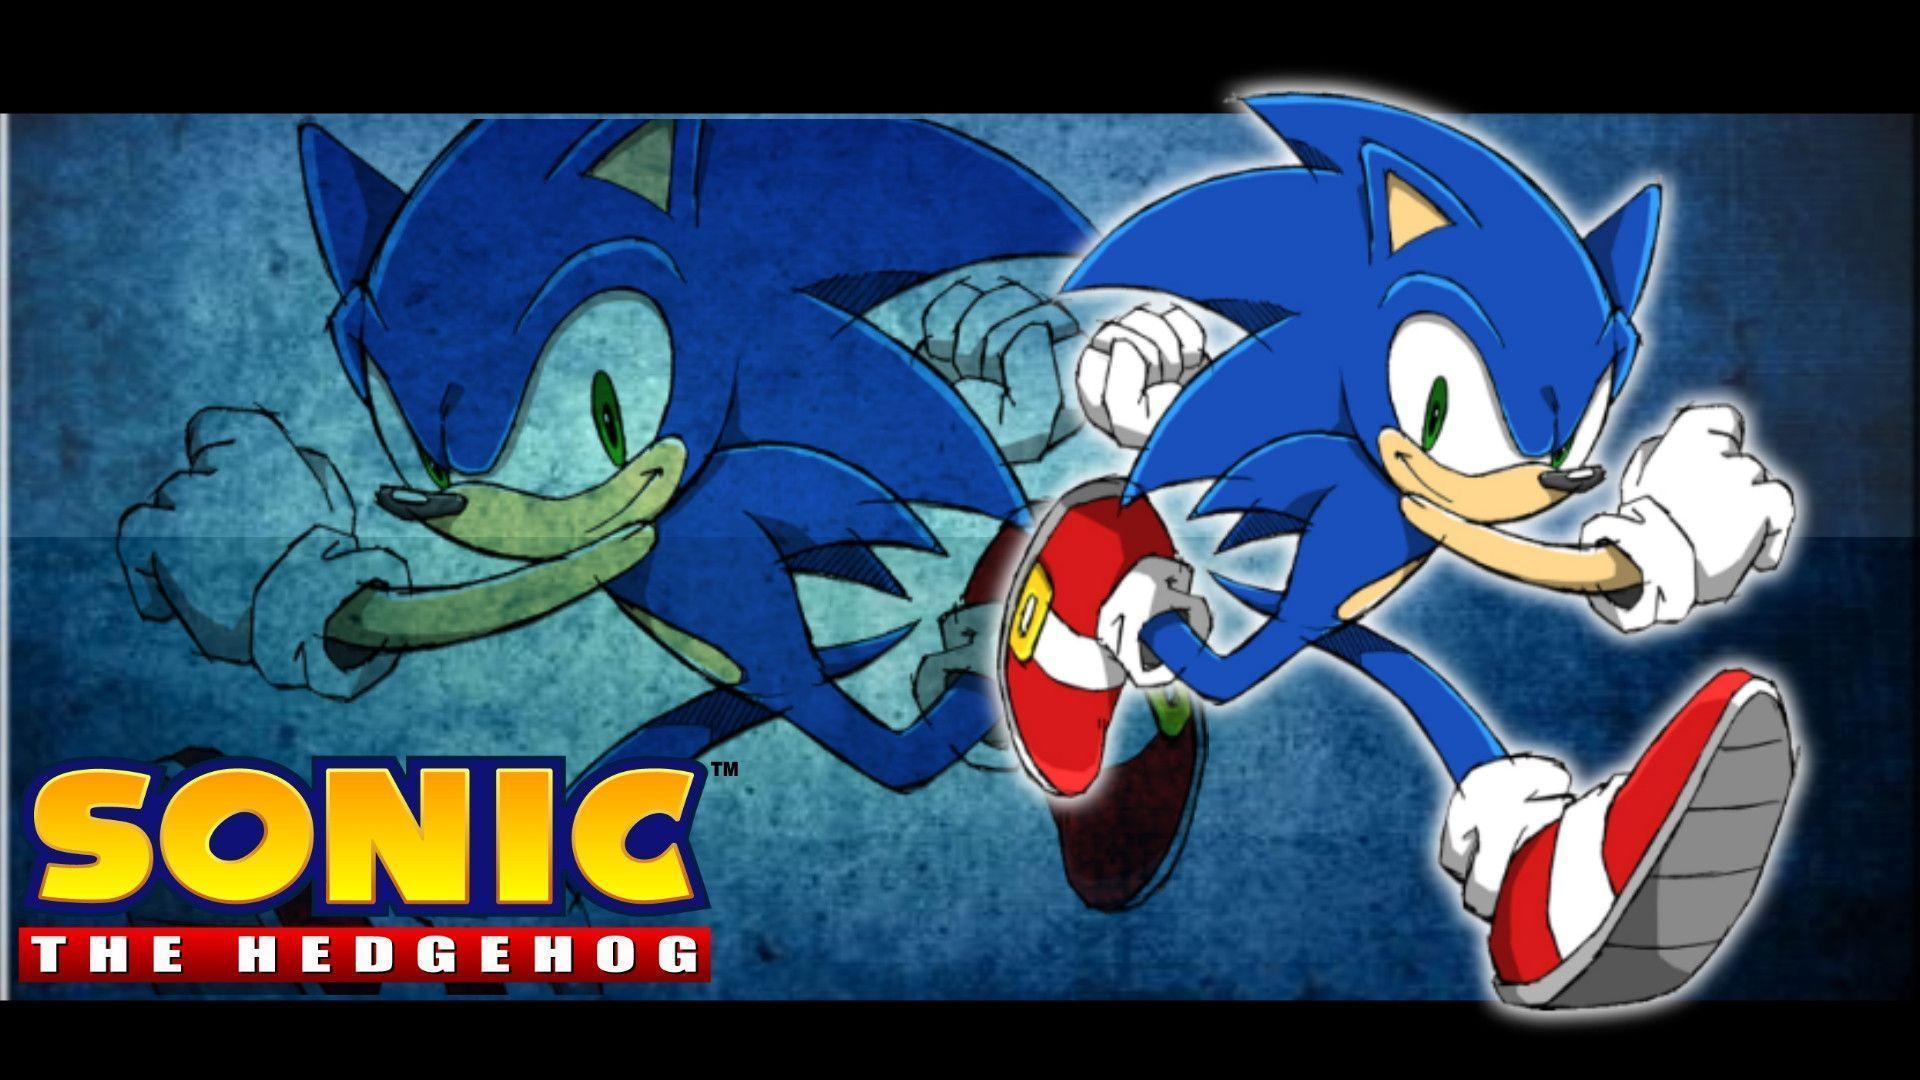 Blue Sonic the Hedgehog Wallpaper Download Logo And Photo Cookies